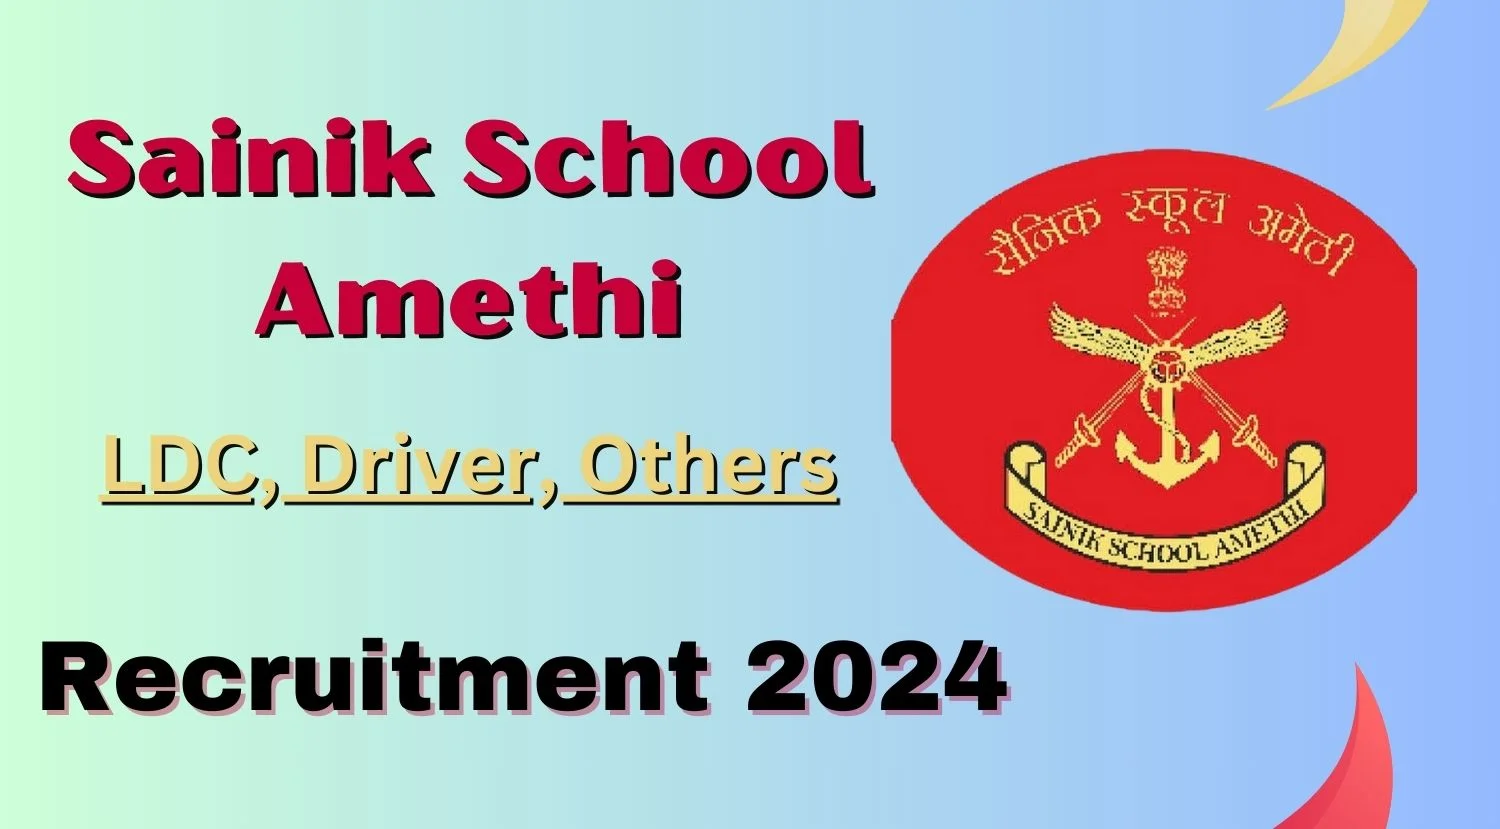 Sainik School Amethi Recruitment 2024 Notification Out for LDC, Driver, Others Posts